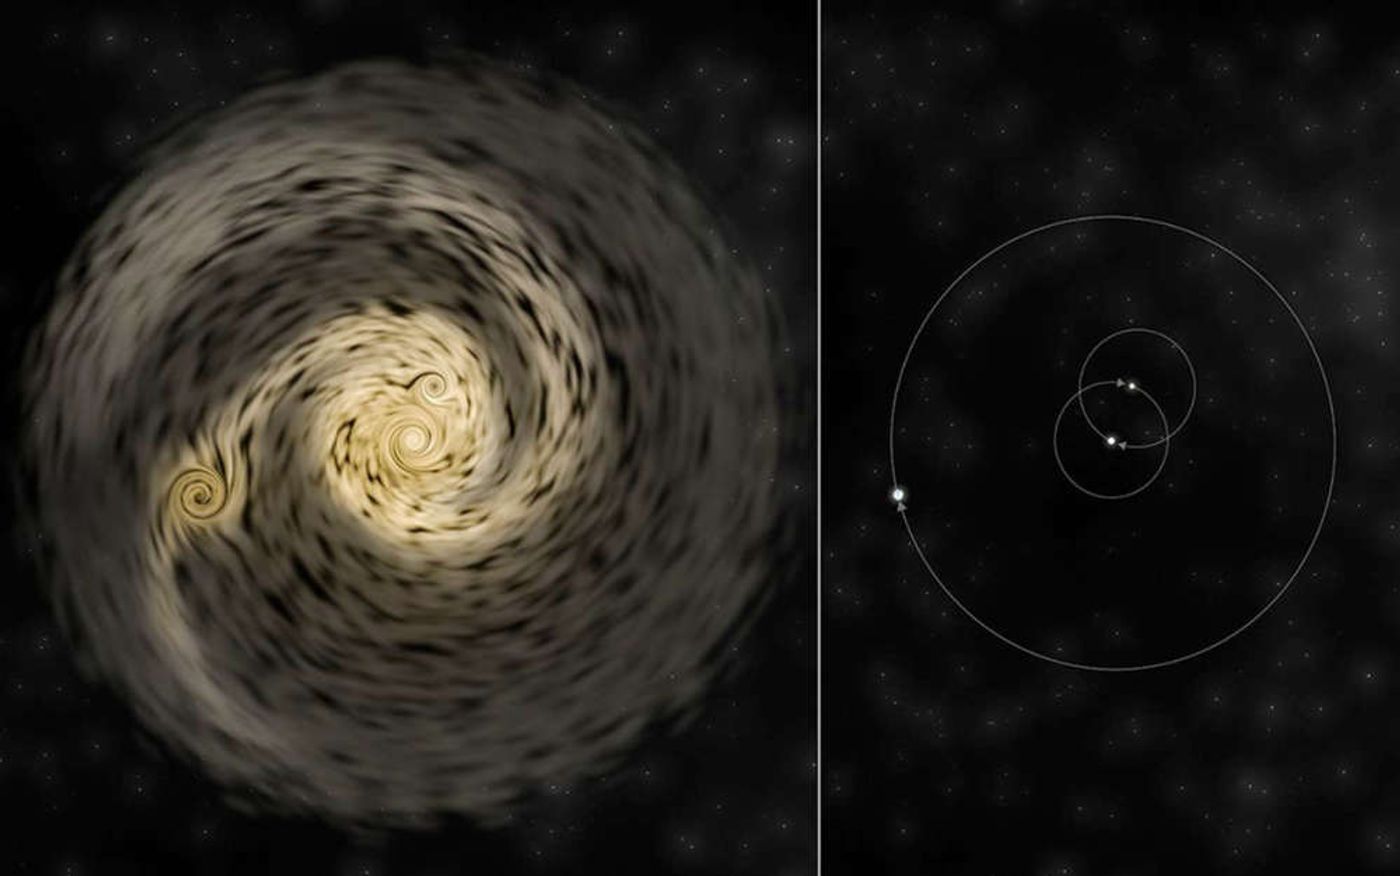 An artist's impression of the triple star system.